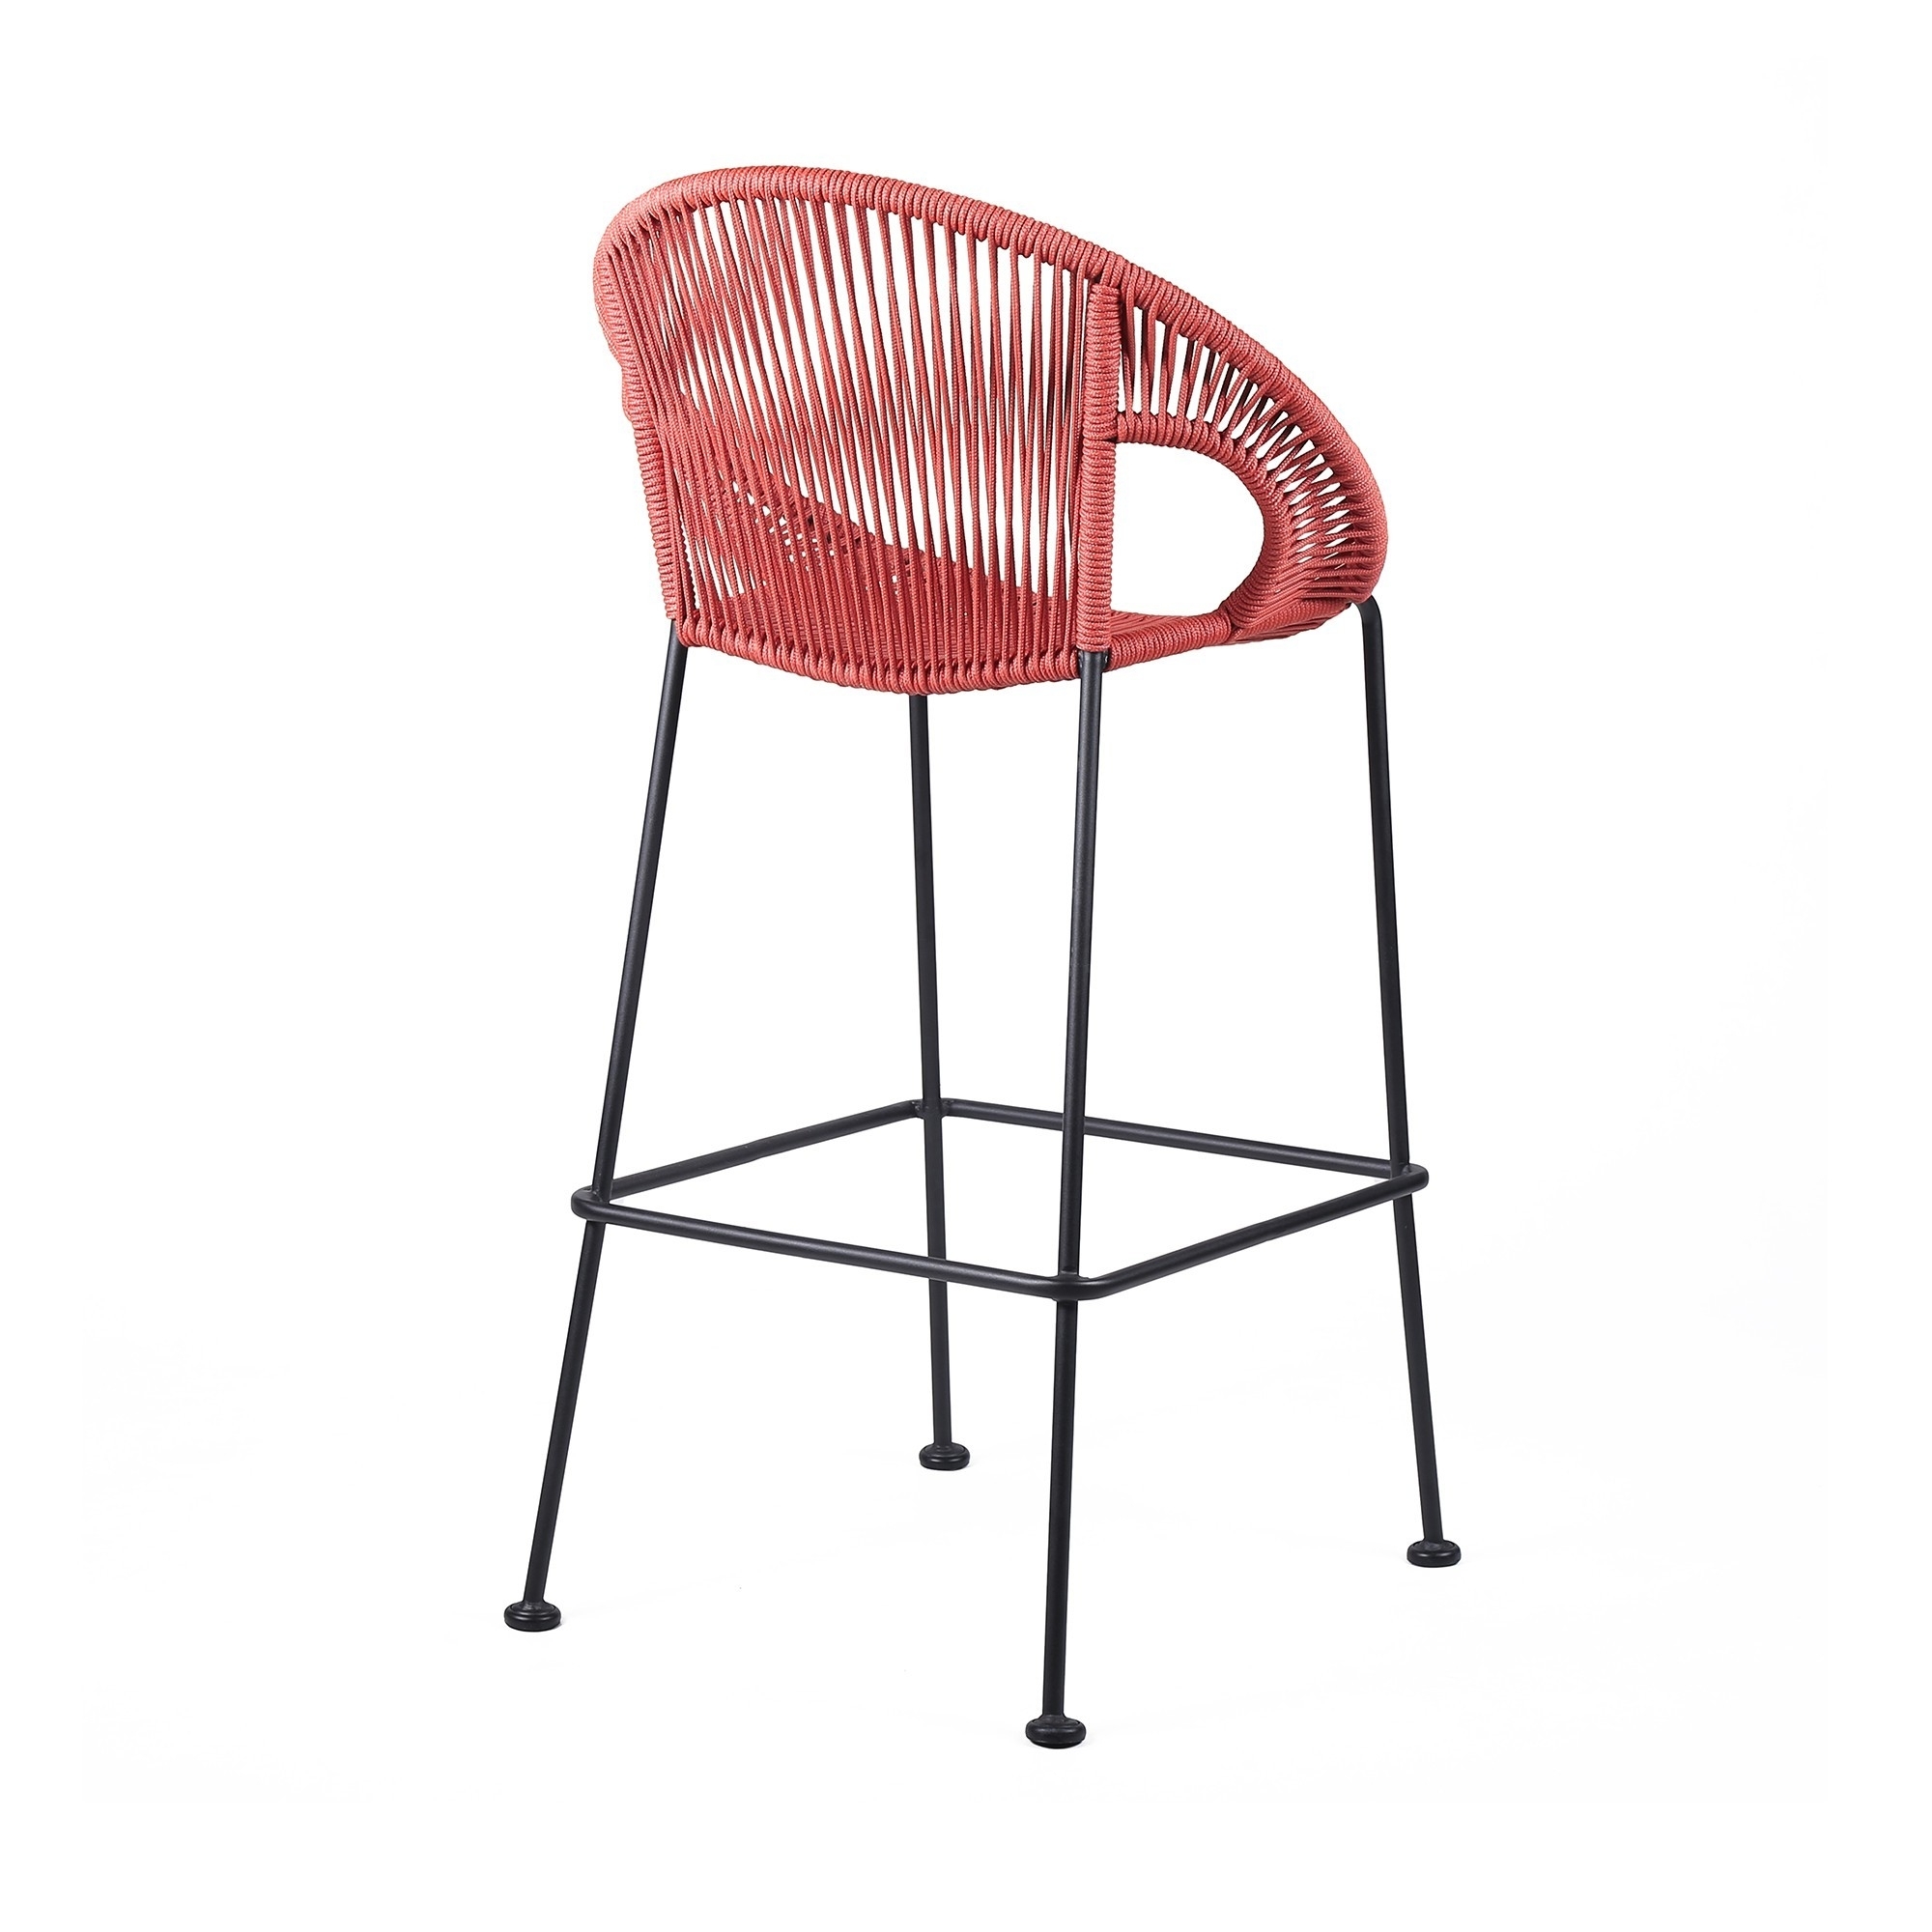 30 Inch Indoor Outdoor Bar Stool With Rounded Rope Woven Seat, Pink- Saltoro Sherpi